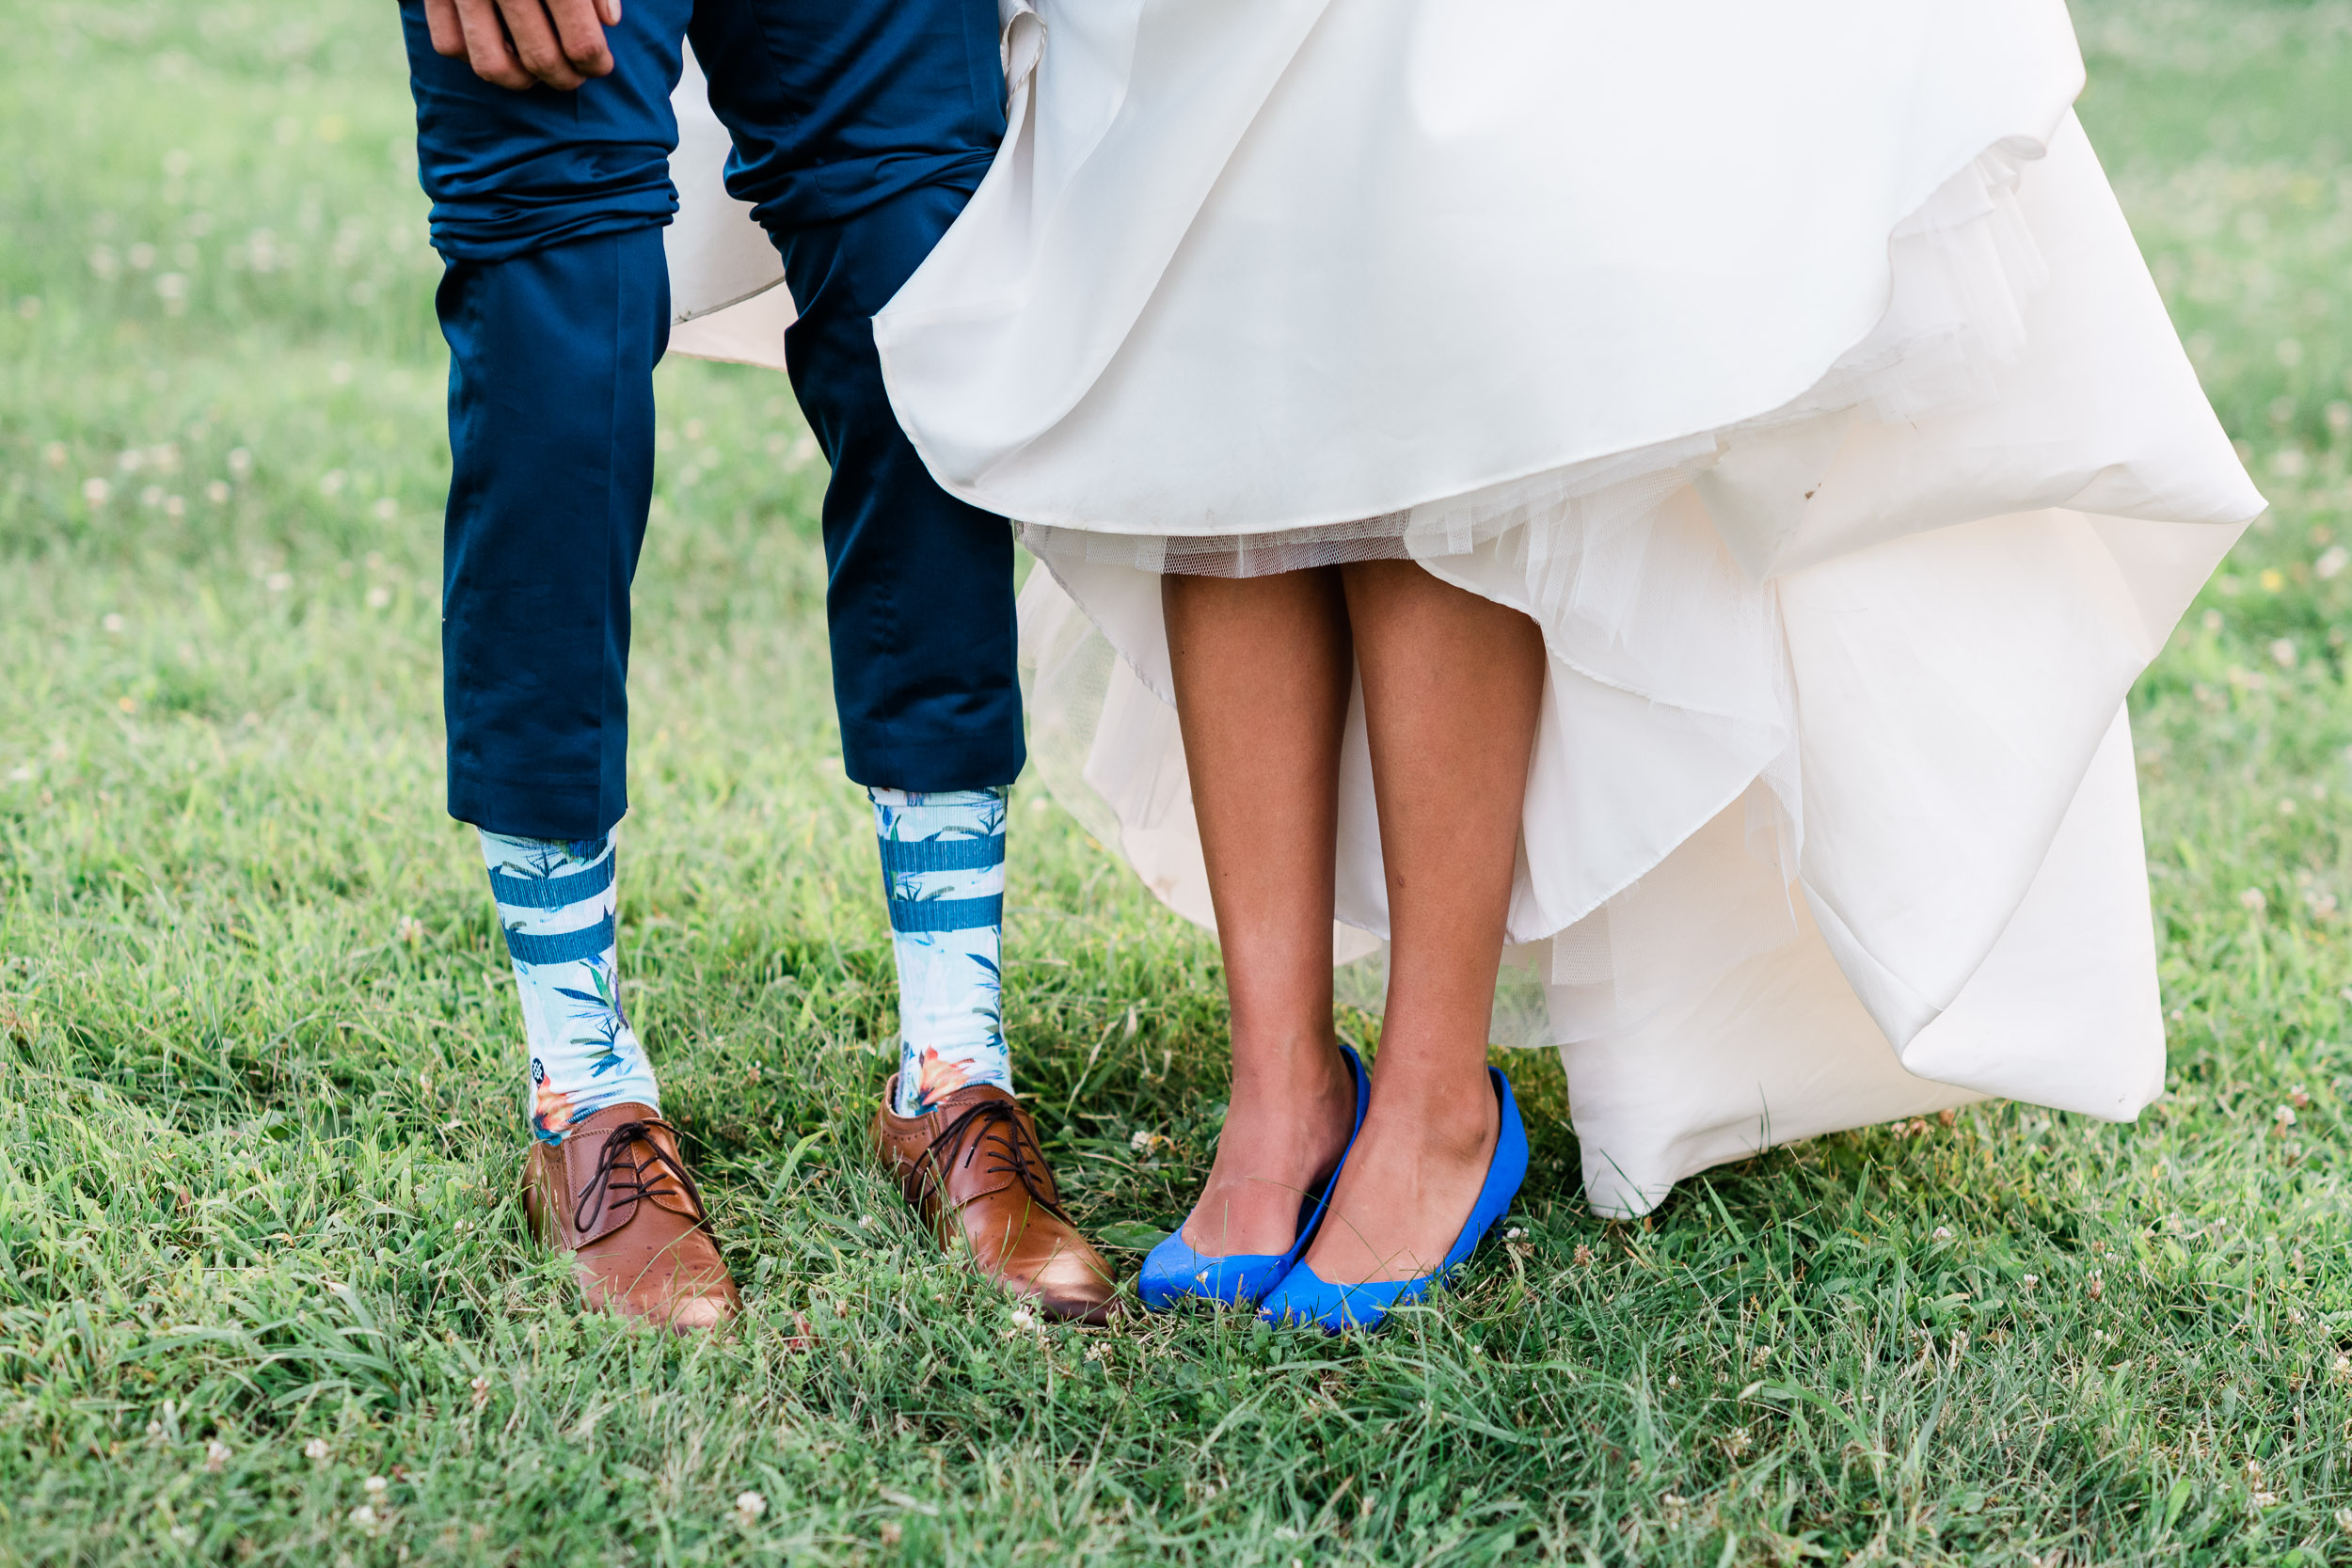 Bride and groom showing their shoes